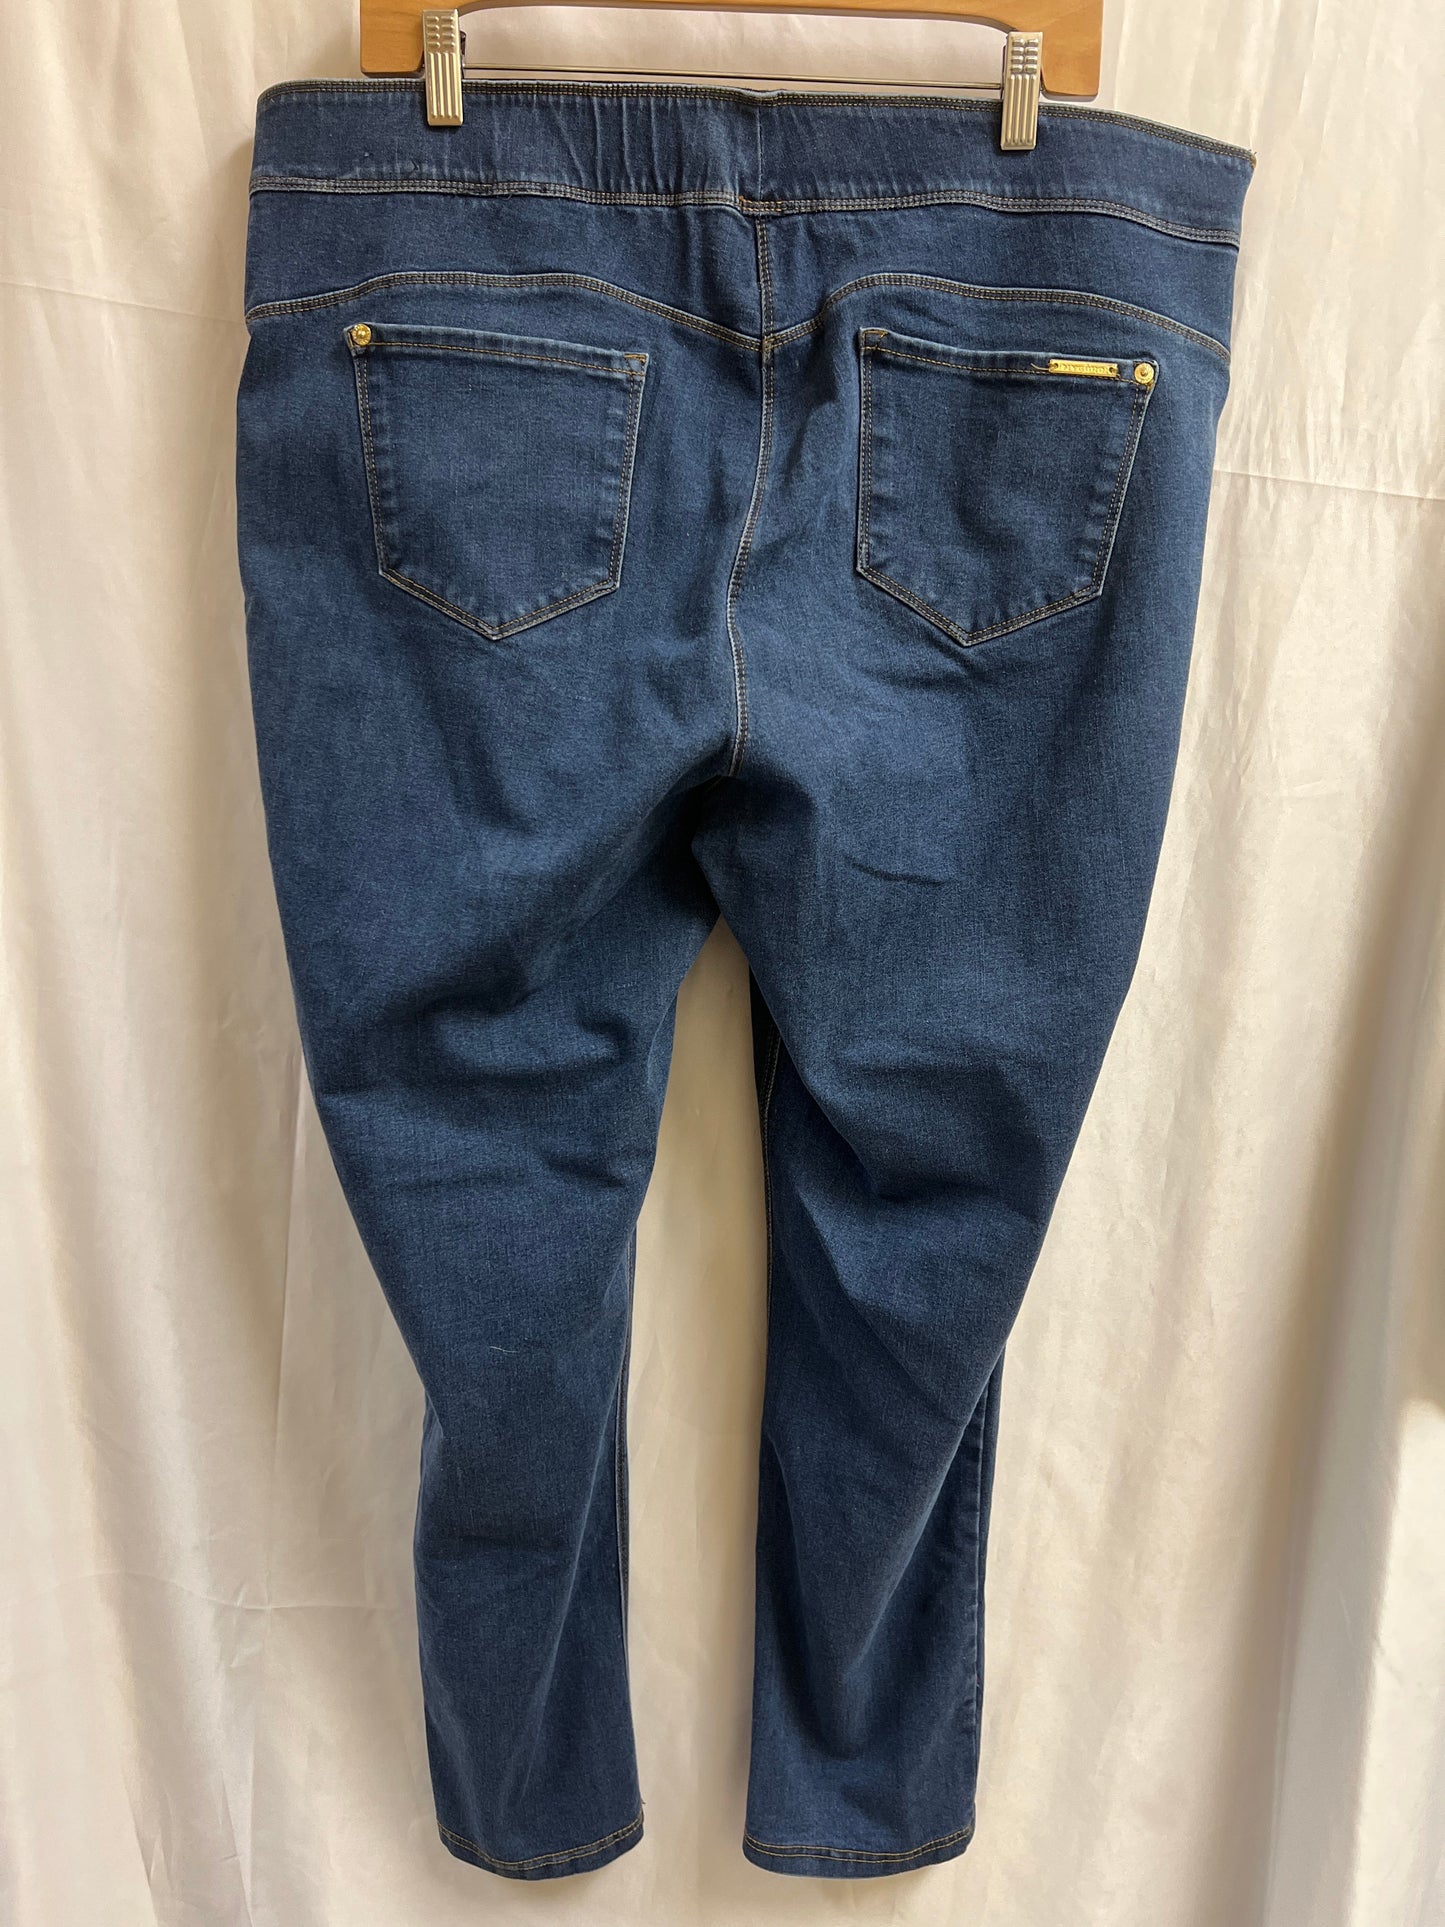 Jeggings By Peter Nygard  Size: 2x